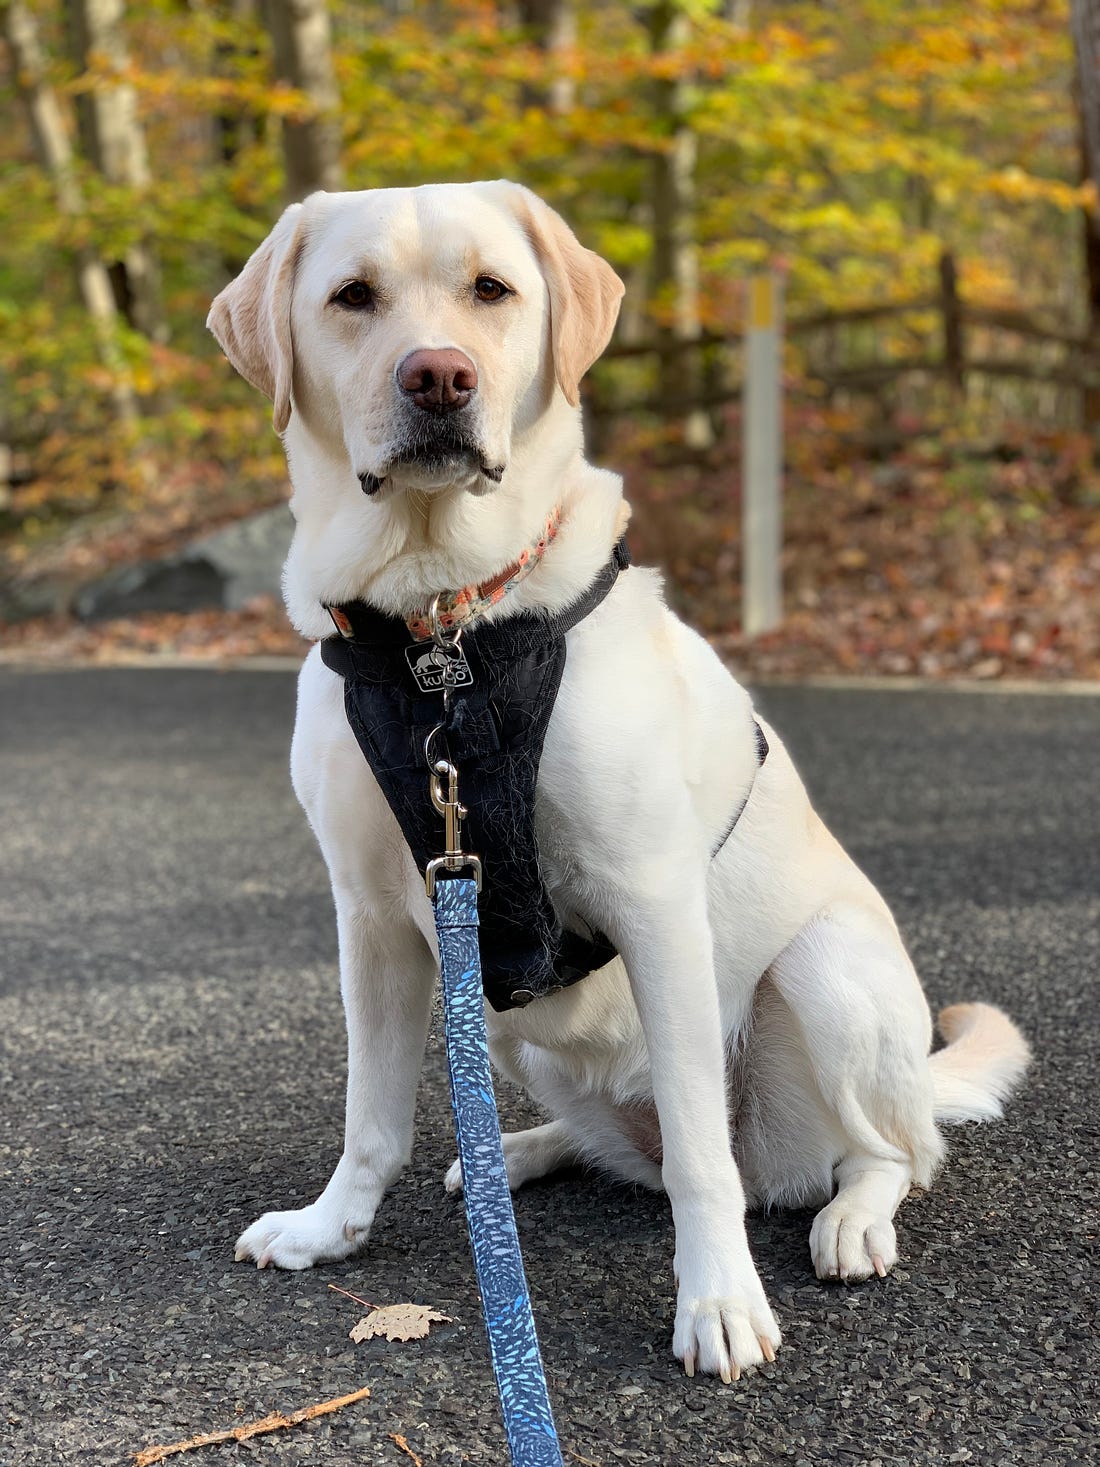 a yellow Labrador retriever poses in front of yellow and green fall foliage